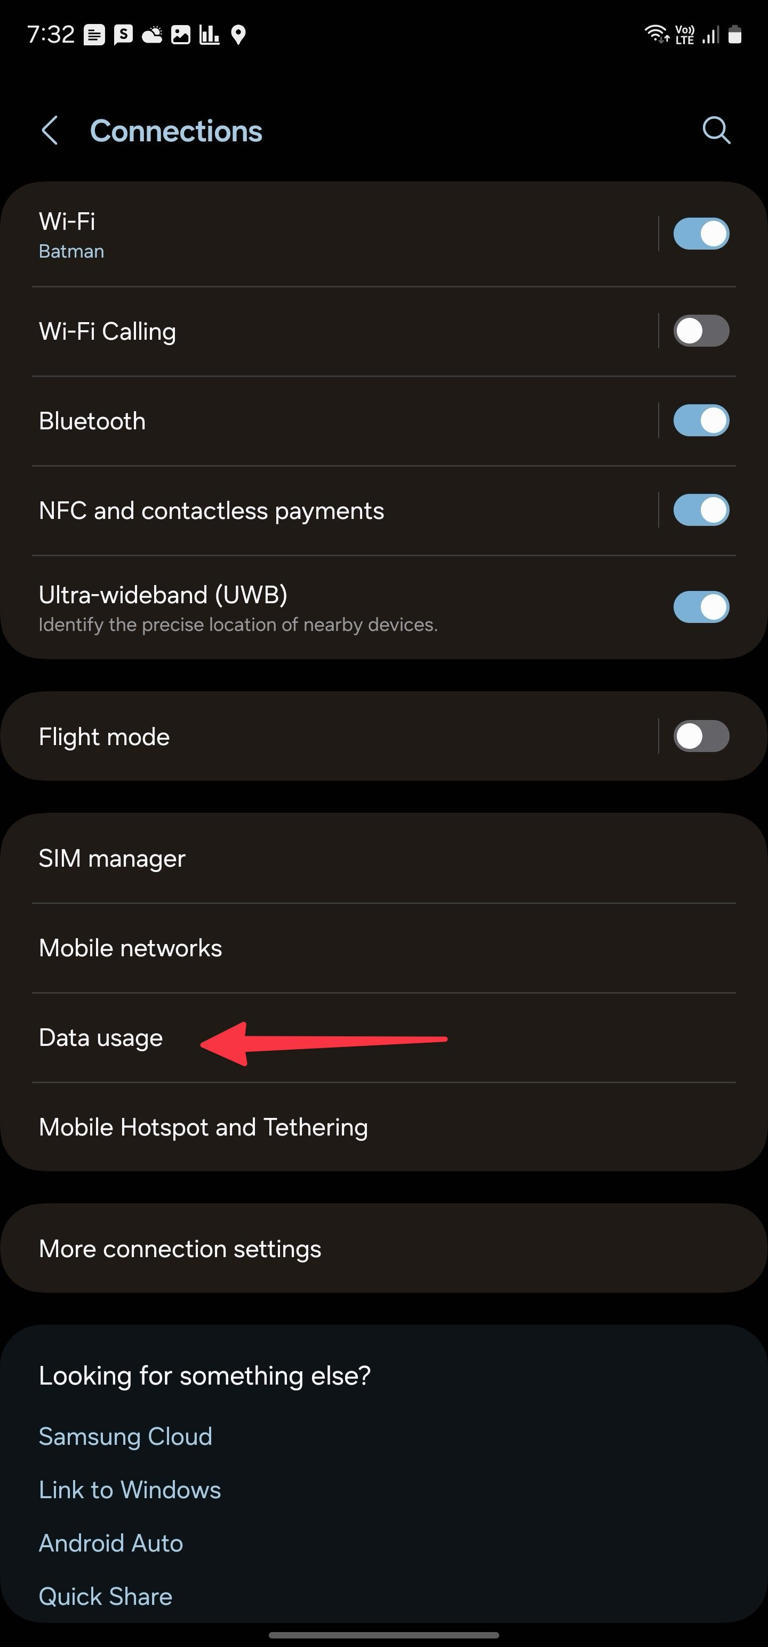 red solid arrow pointing to data usage on Samsung